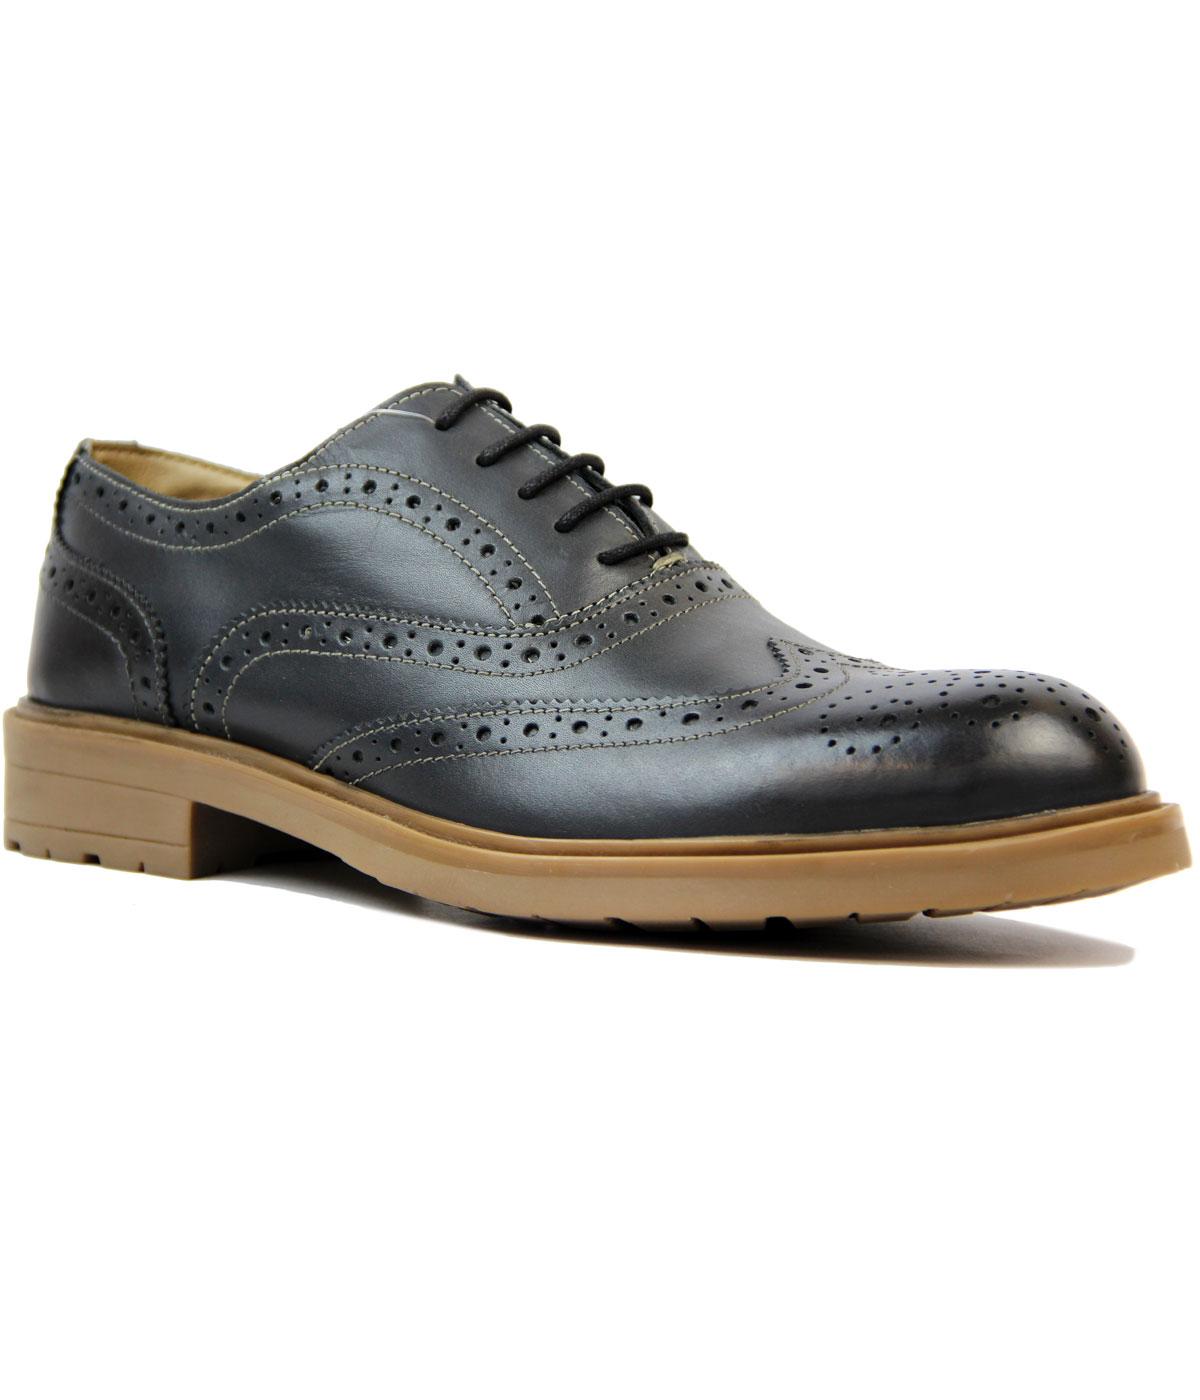 LAMBRETTA Jack Retro 60s Mod Leather Gibson Brogue Shoes in Grey